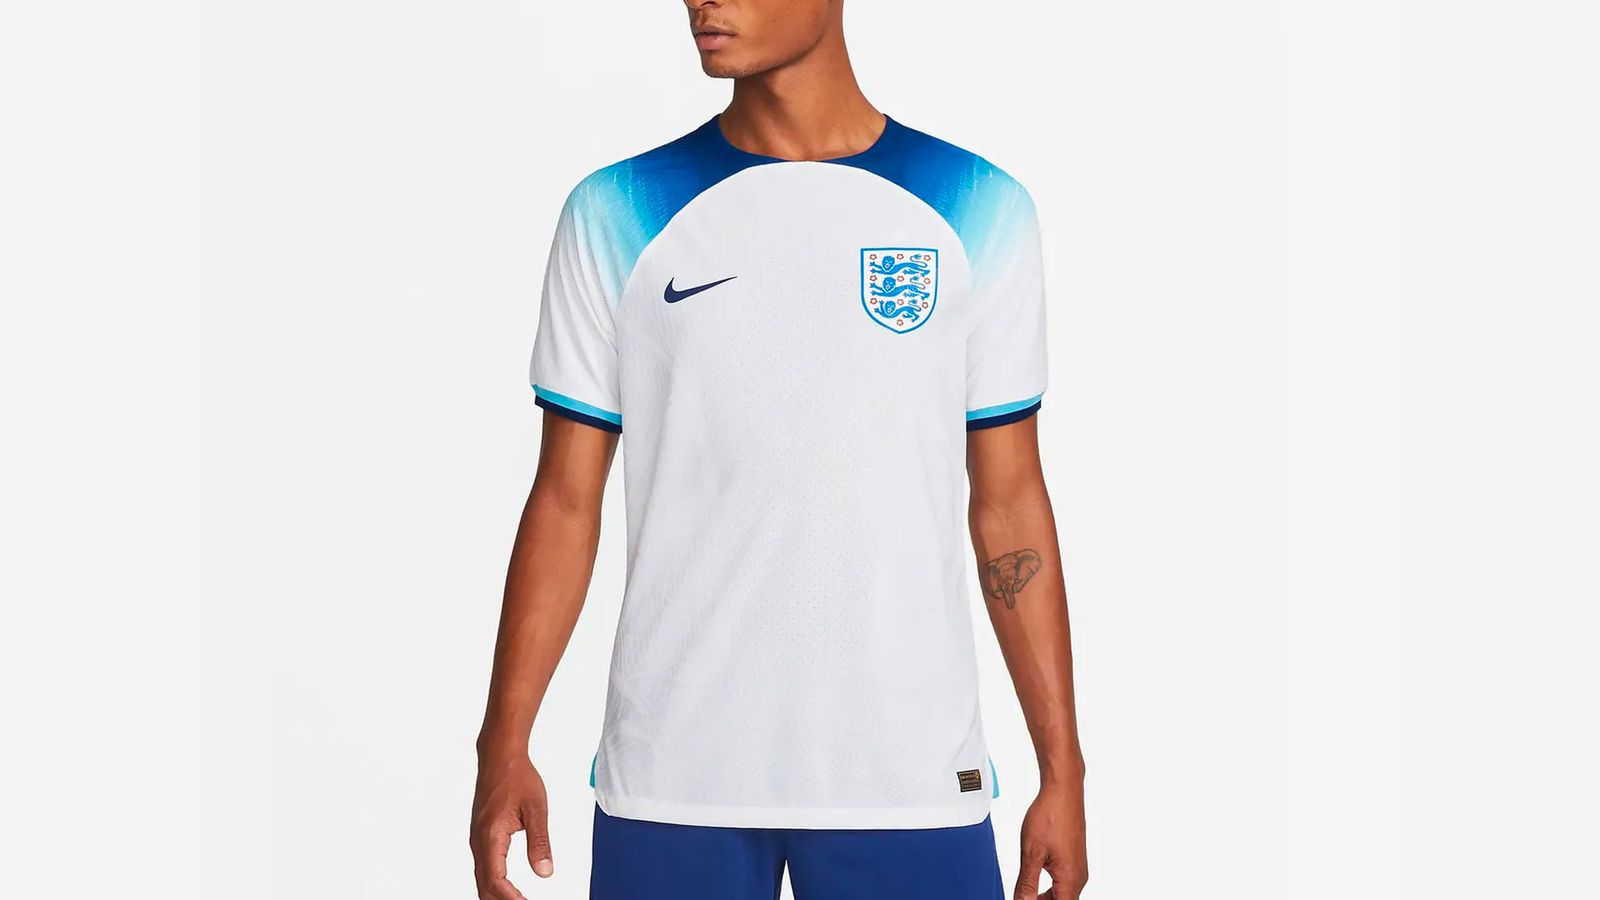 England 2022 World Cup home kit Nike product image of a white shirt with navy blue gradient accents across the shoulders.